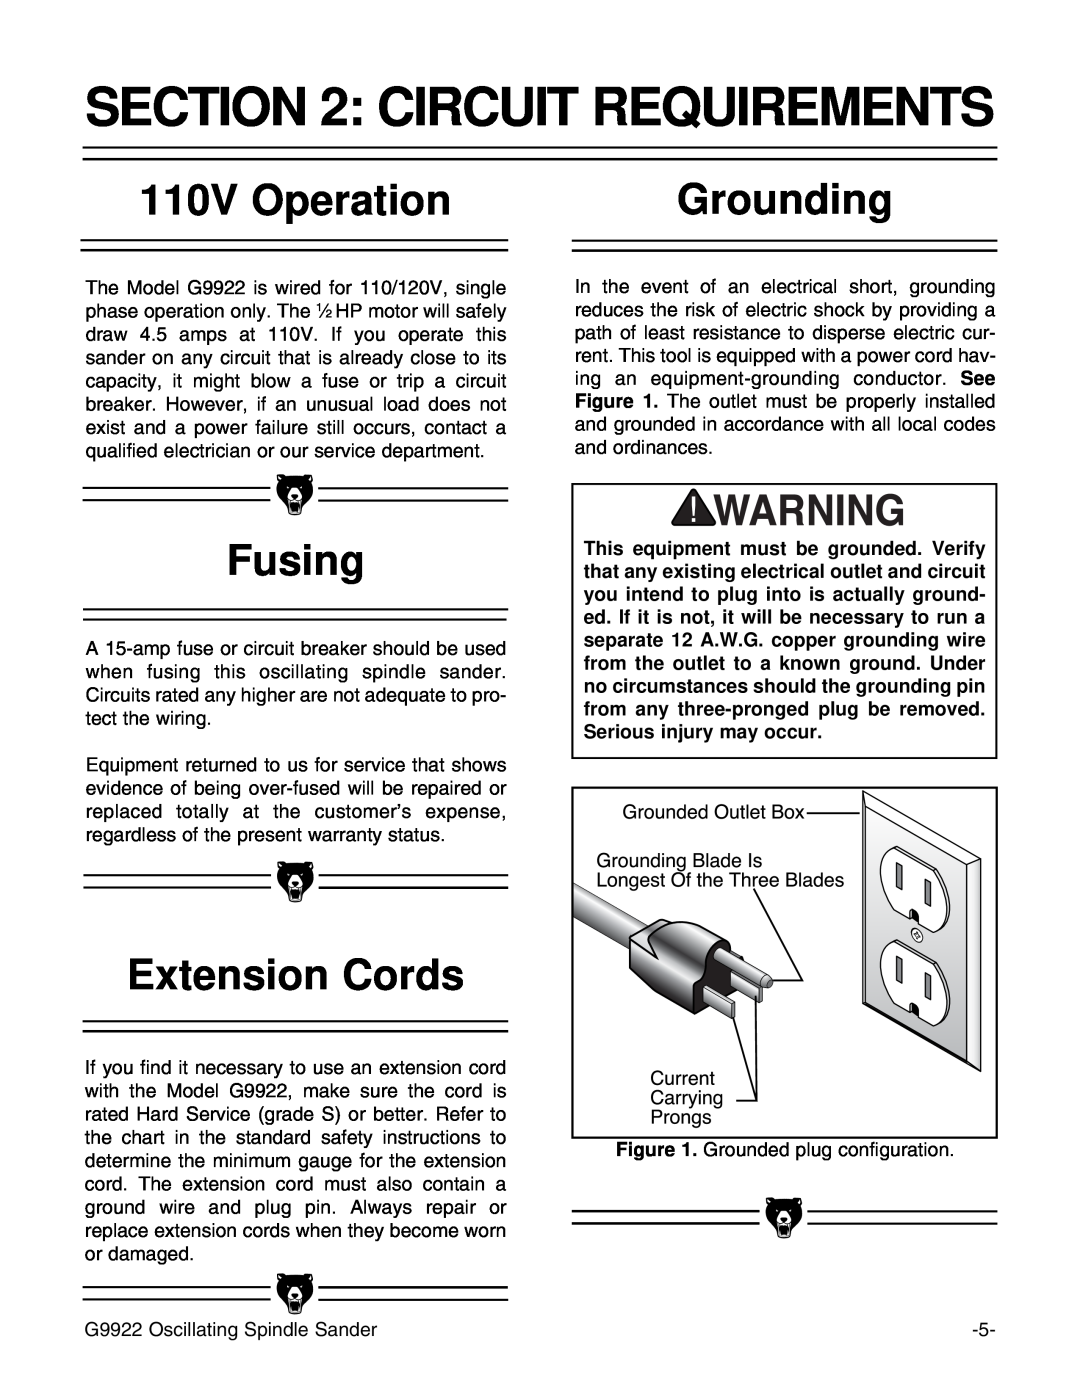 Grizzly G9922 instruction manual Circuit Requirements, 110V Operation, Grounding, Fusing, Extension Cords 